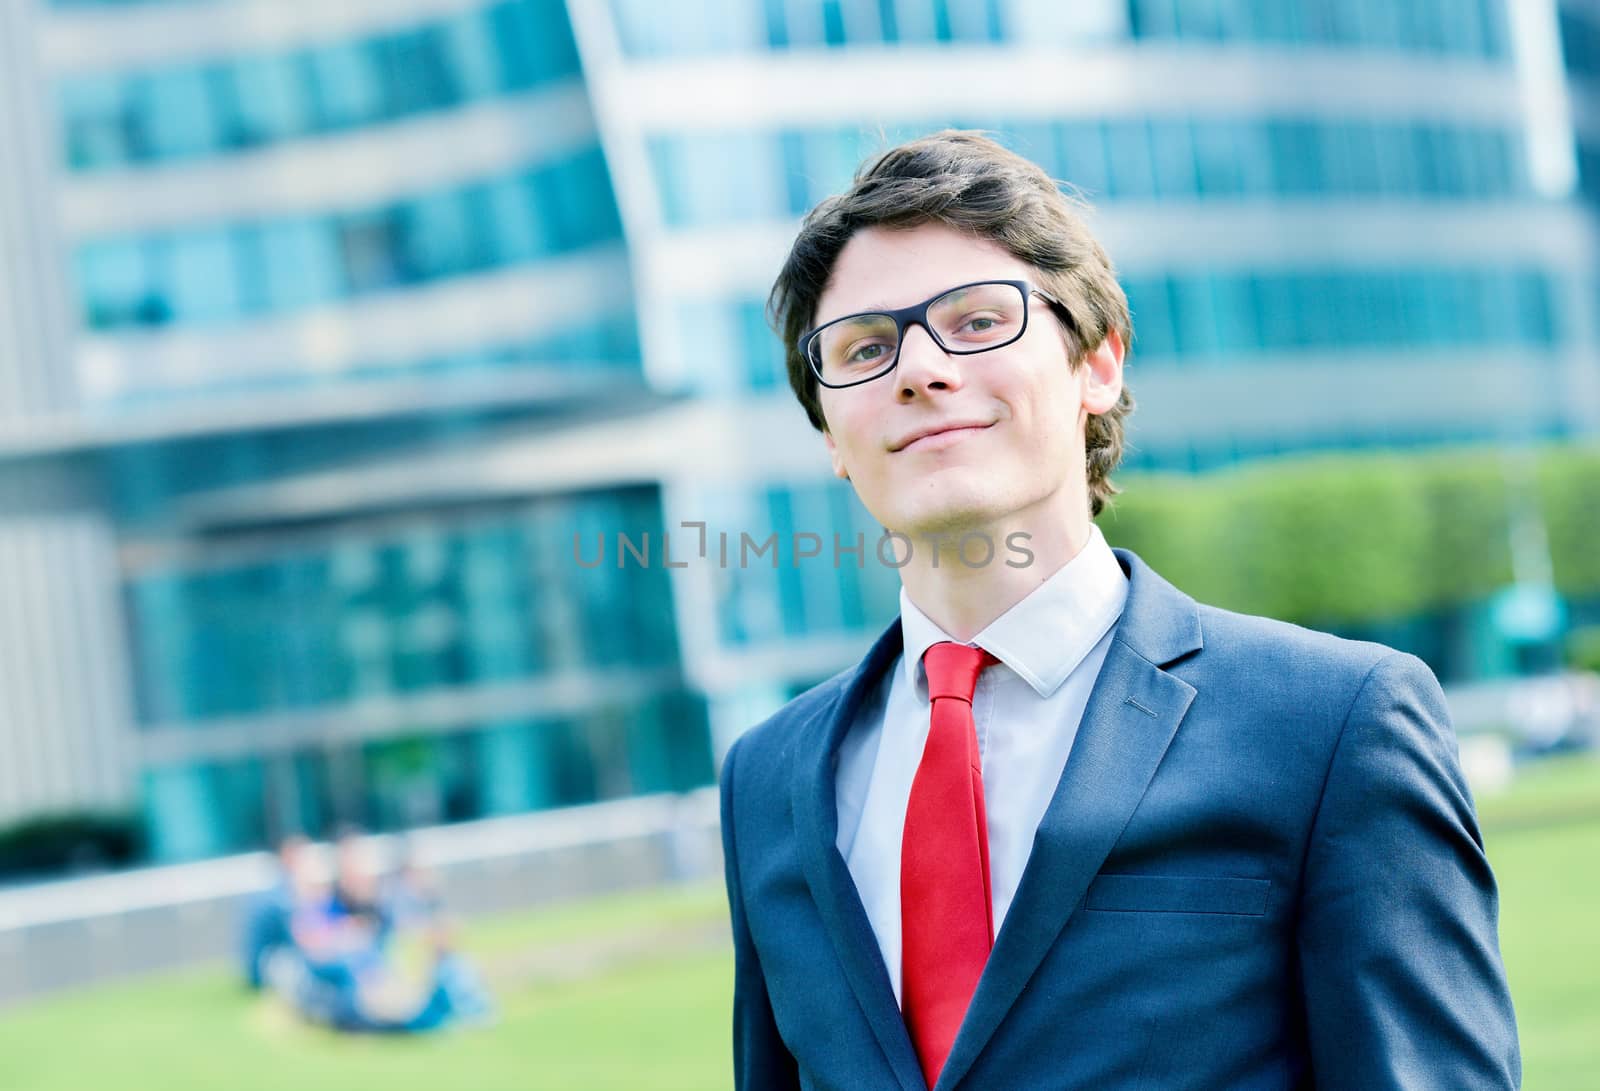 Outdoor portrait of a dynamic junior executive smiling